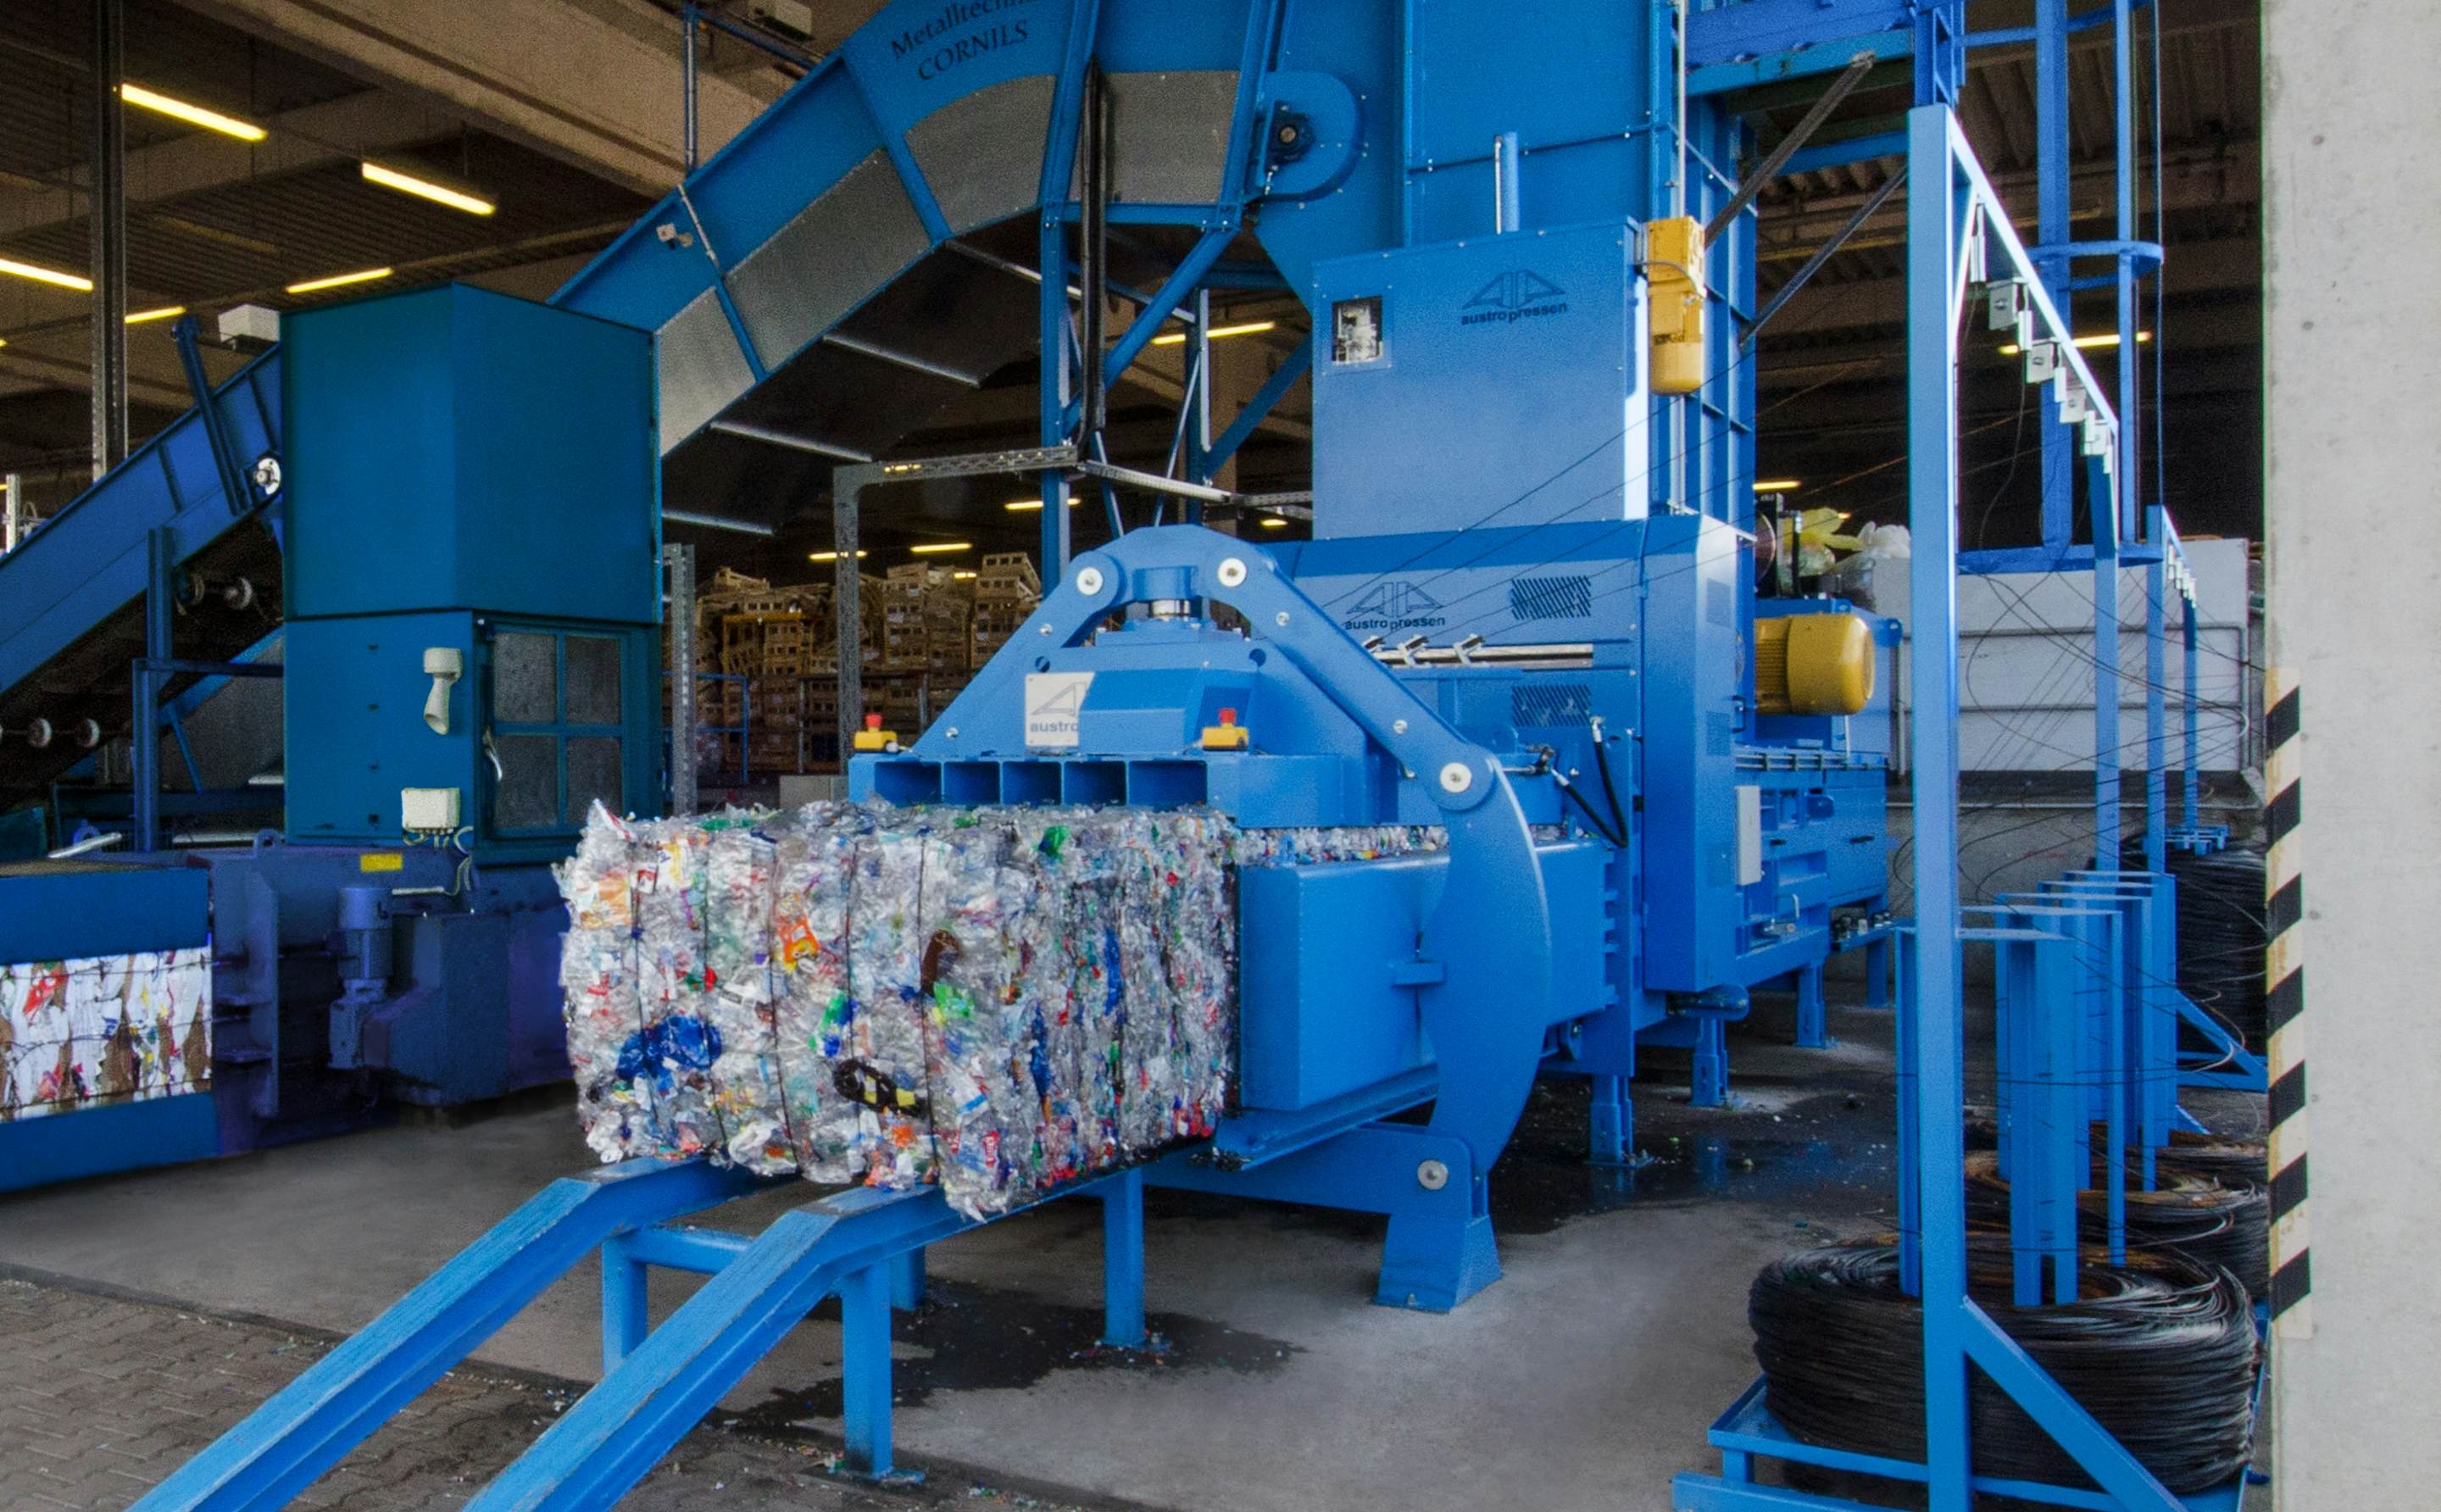 Concentrated solutions for smart waste management at many VEOLIA locations